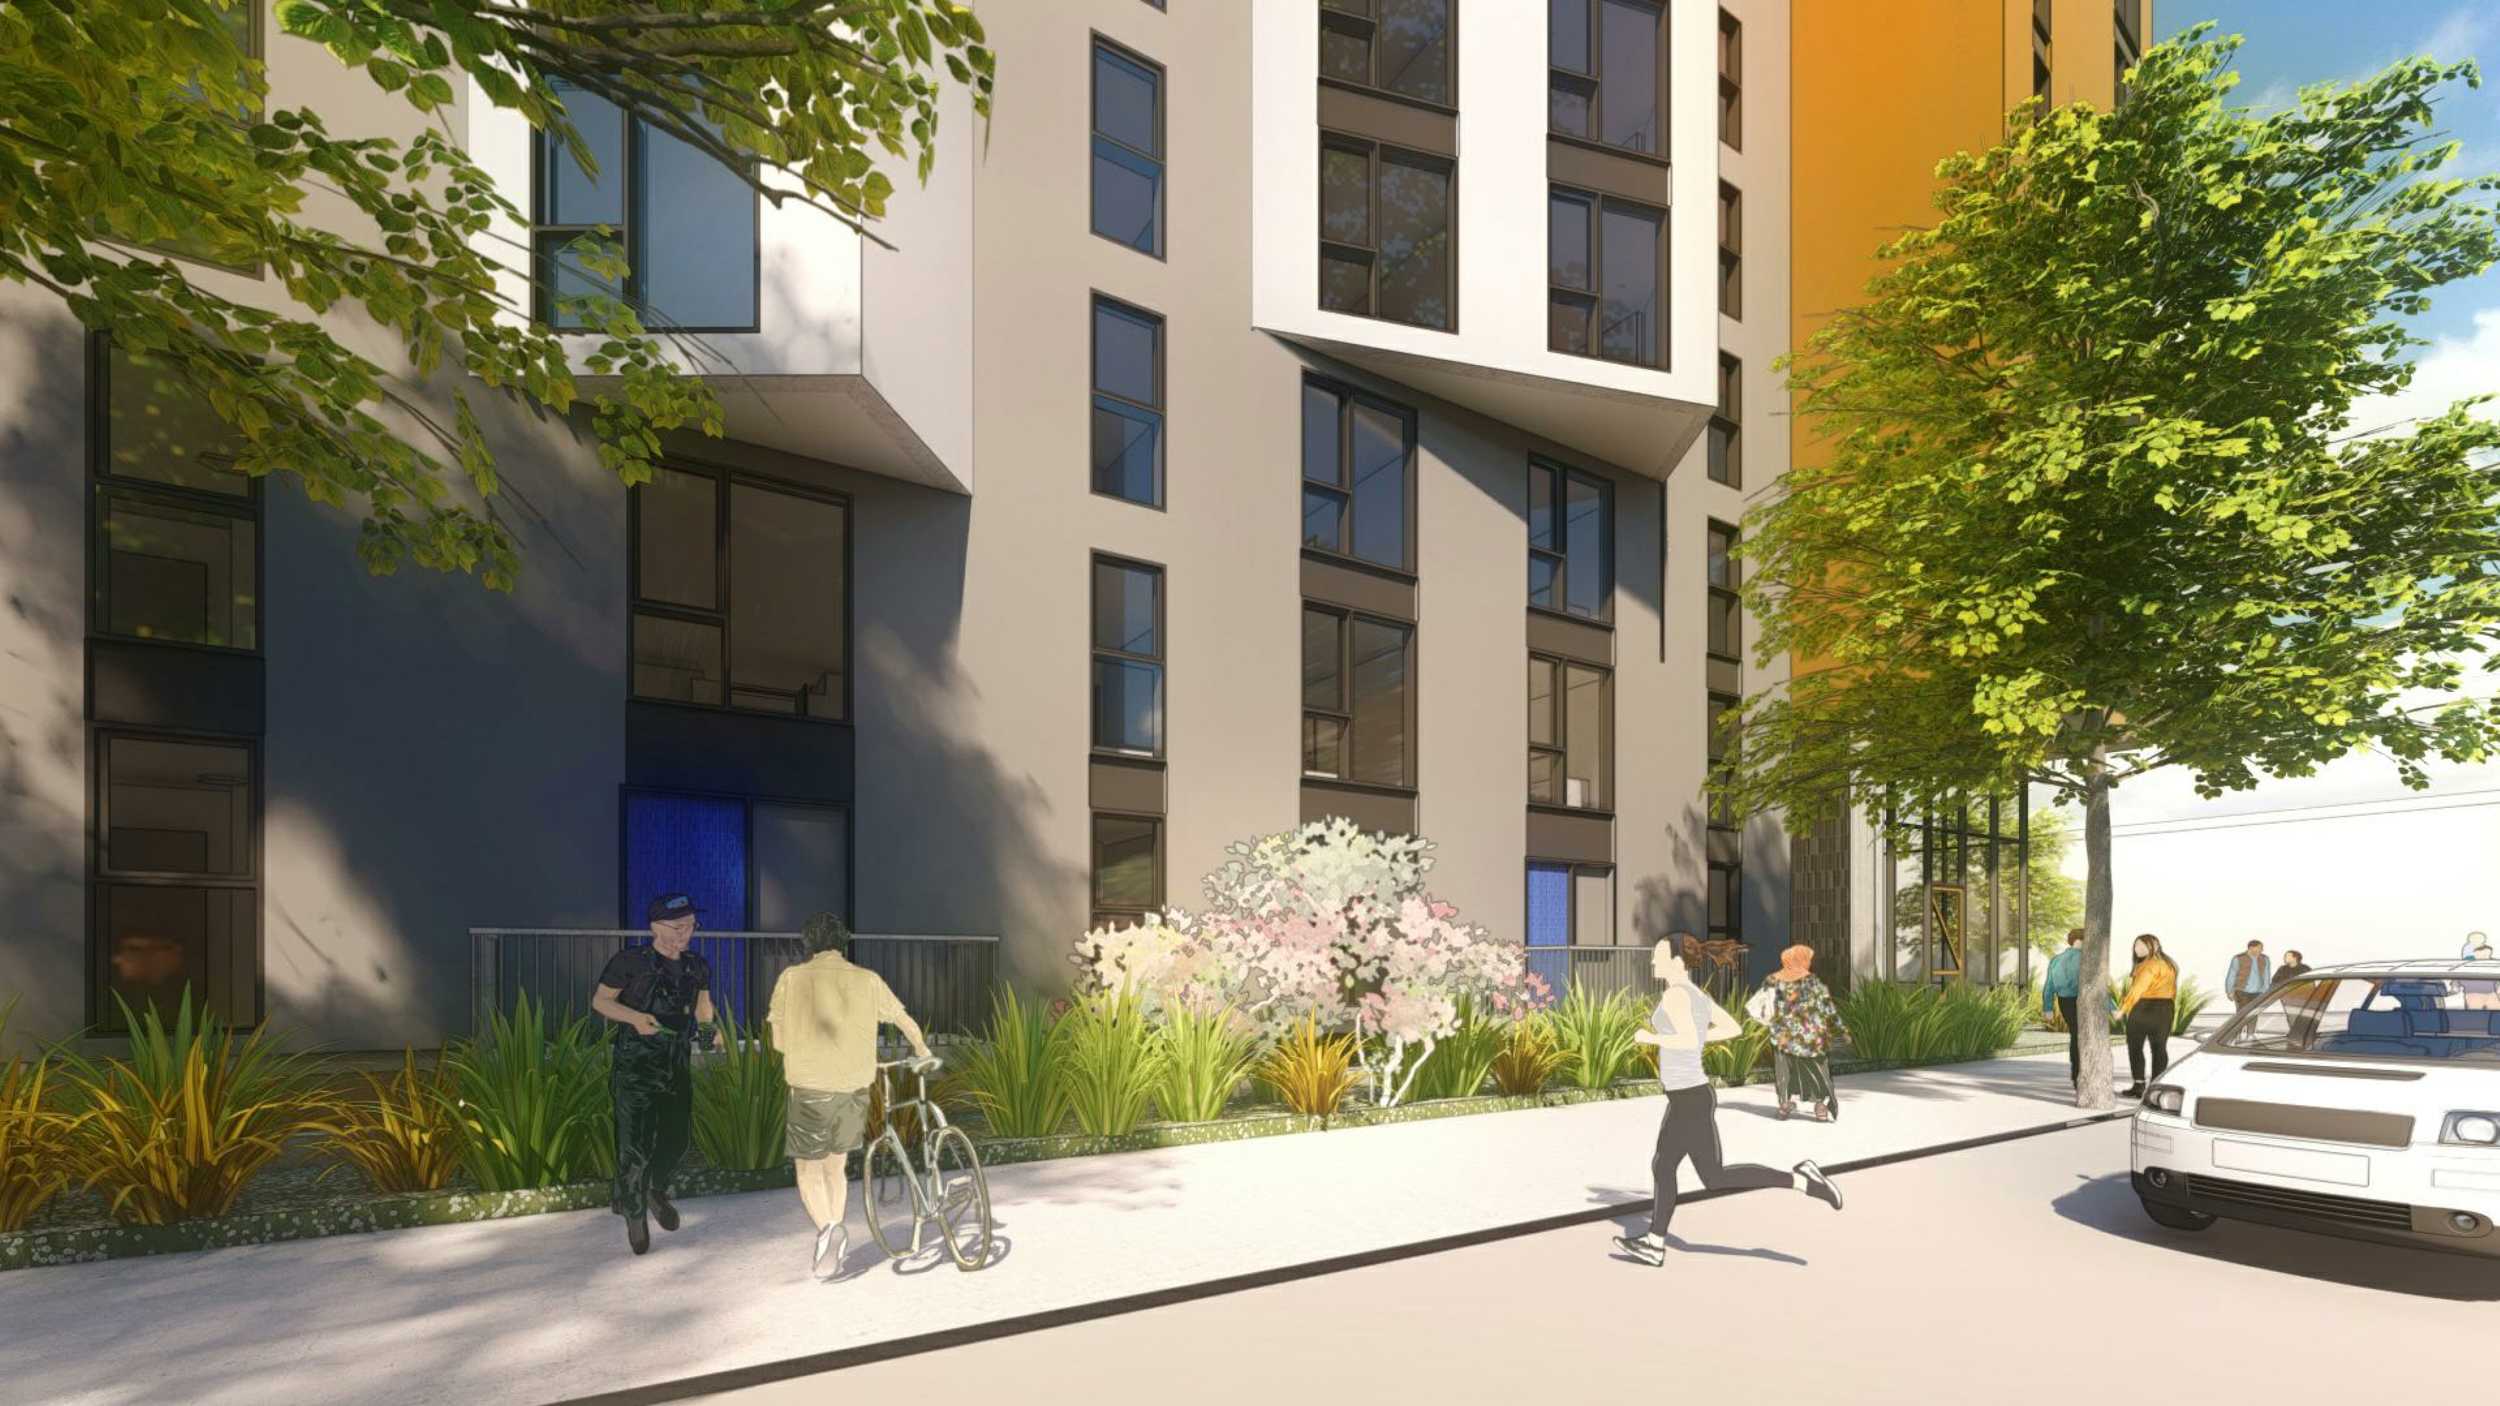 1515 South Van Ness Avenue residential bays, rendering by David Baker Architects and Y.A. Studio